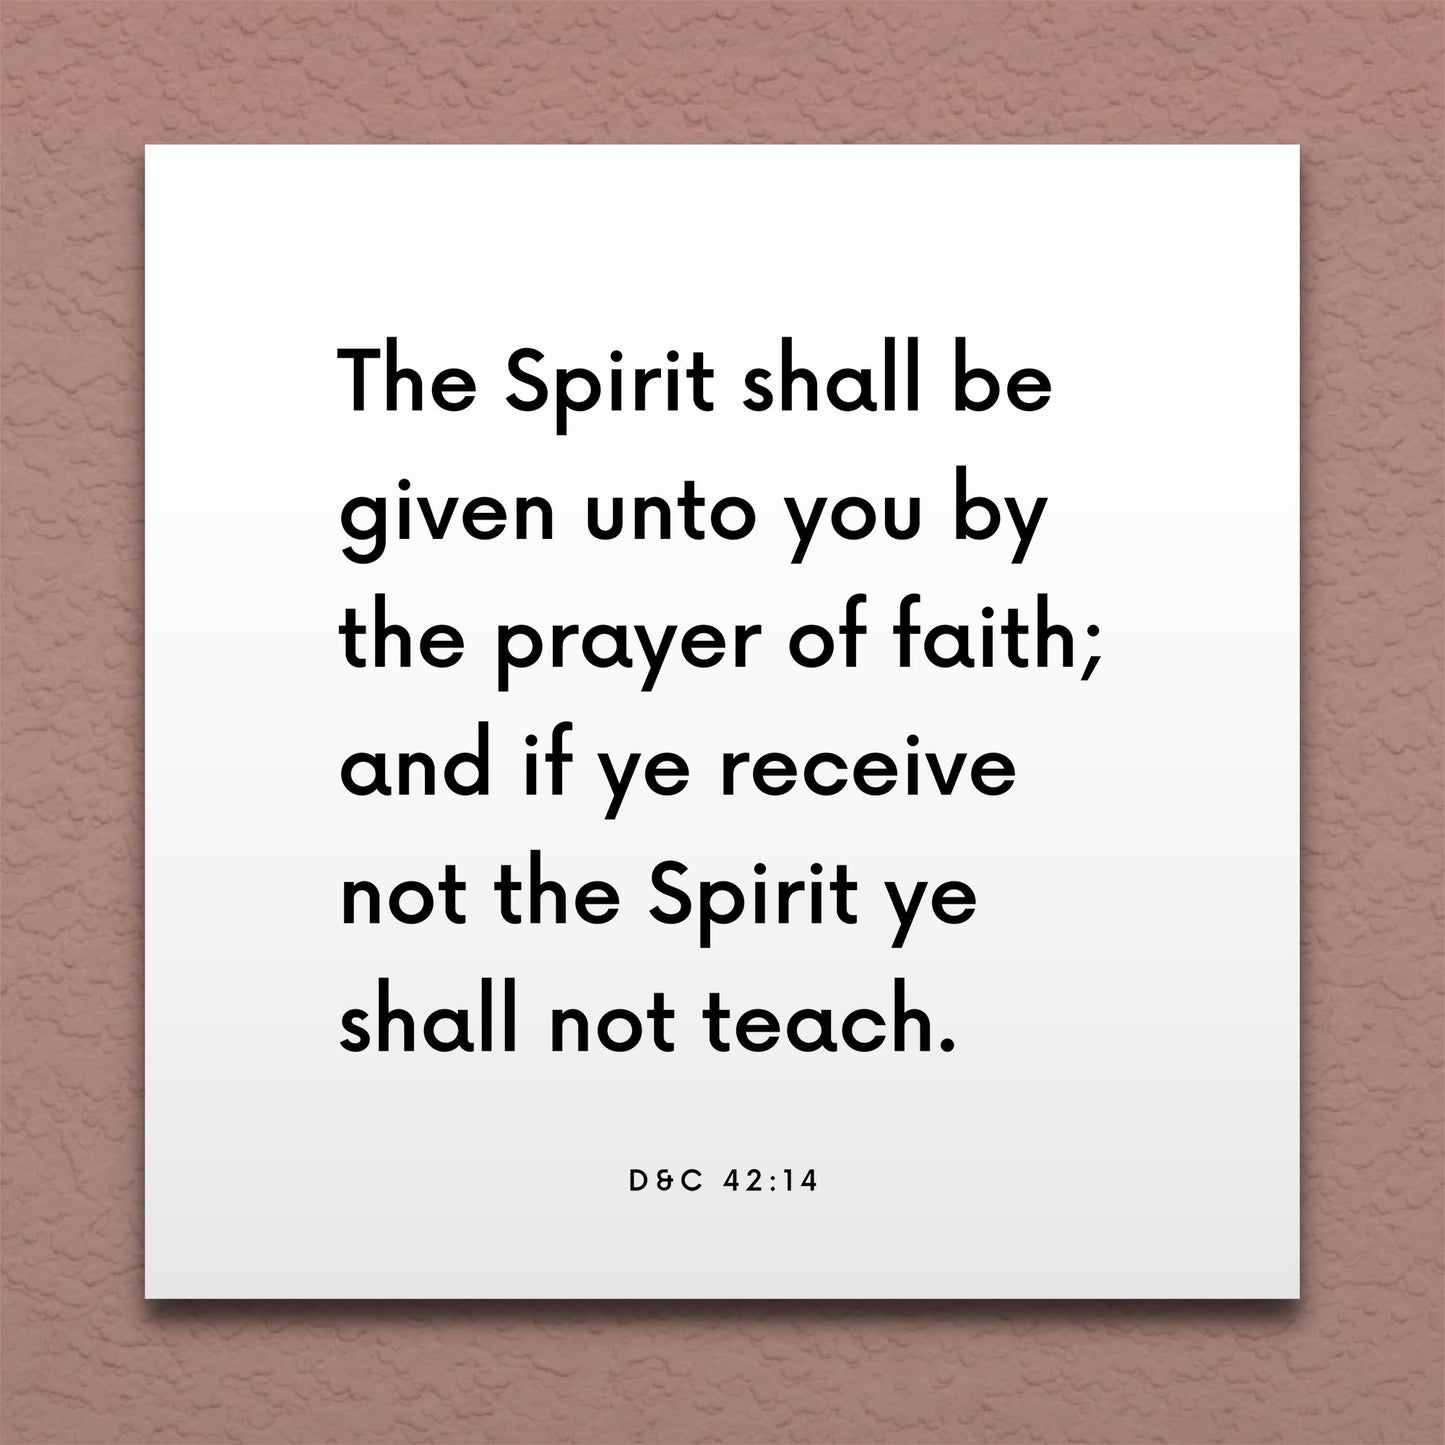 Wall-mounted scripture tile for D&C 42:14 - "If ye receive not the Spirit ye shall not teach"